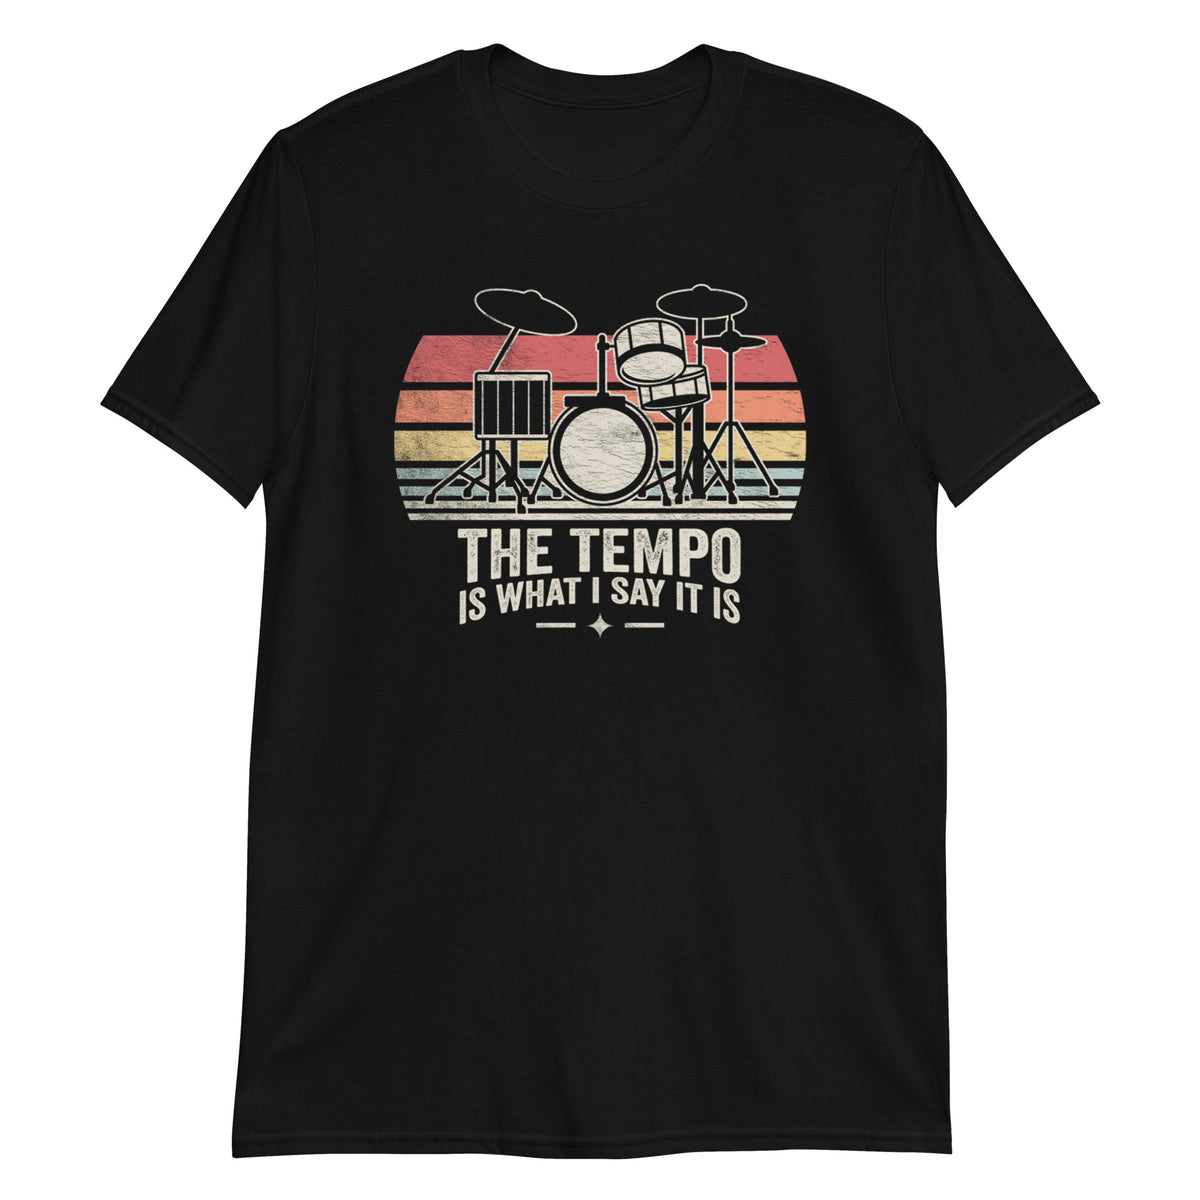 The Tempo is What I Say it is T-Shirt